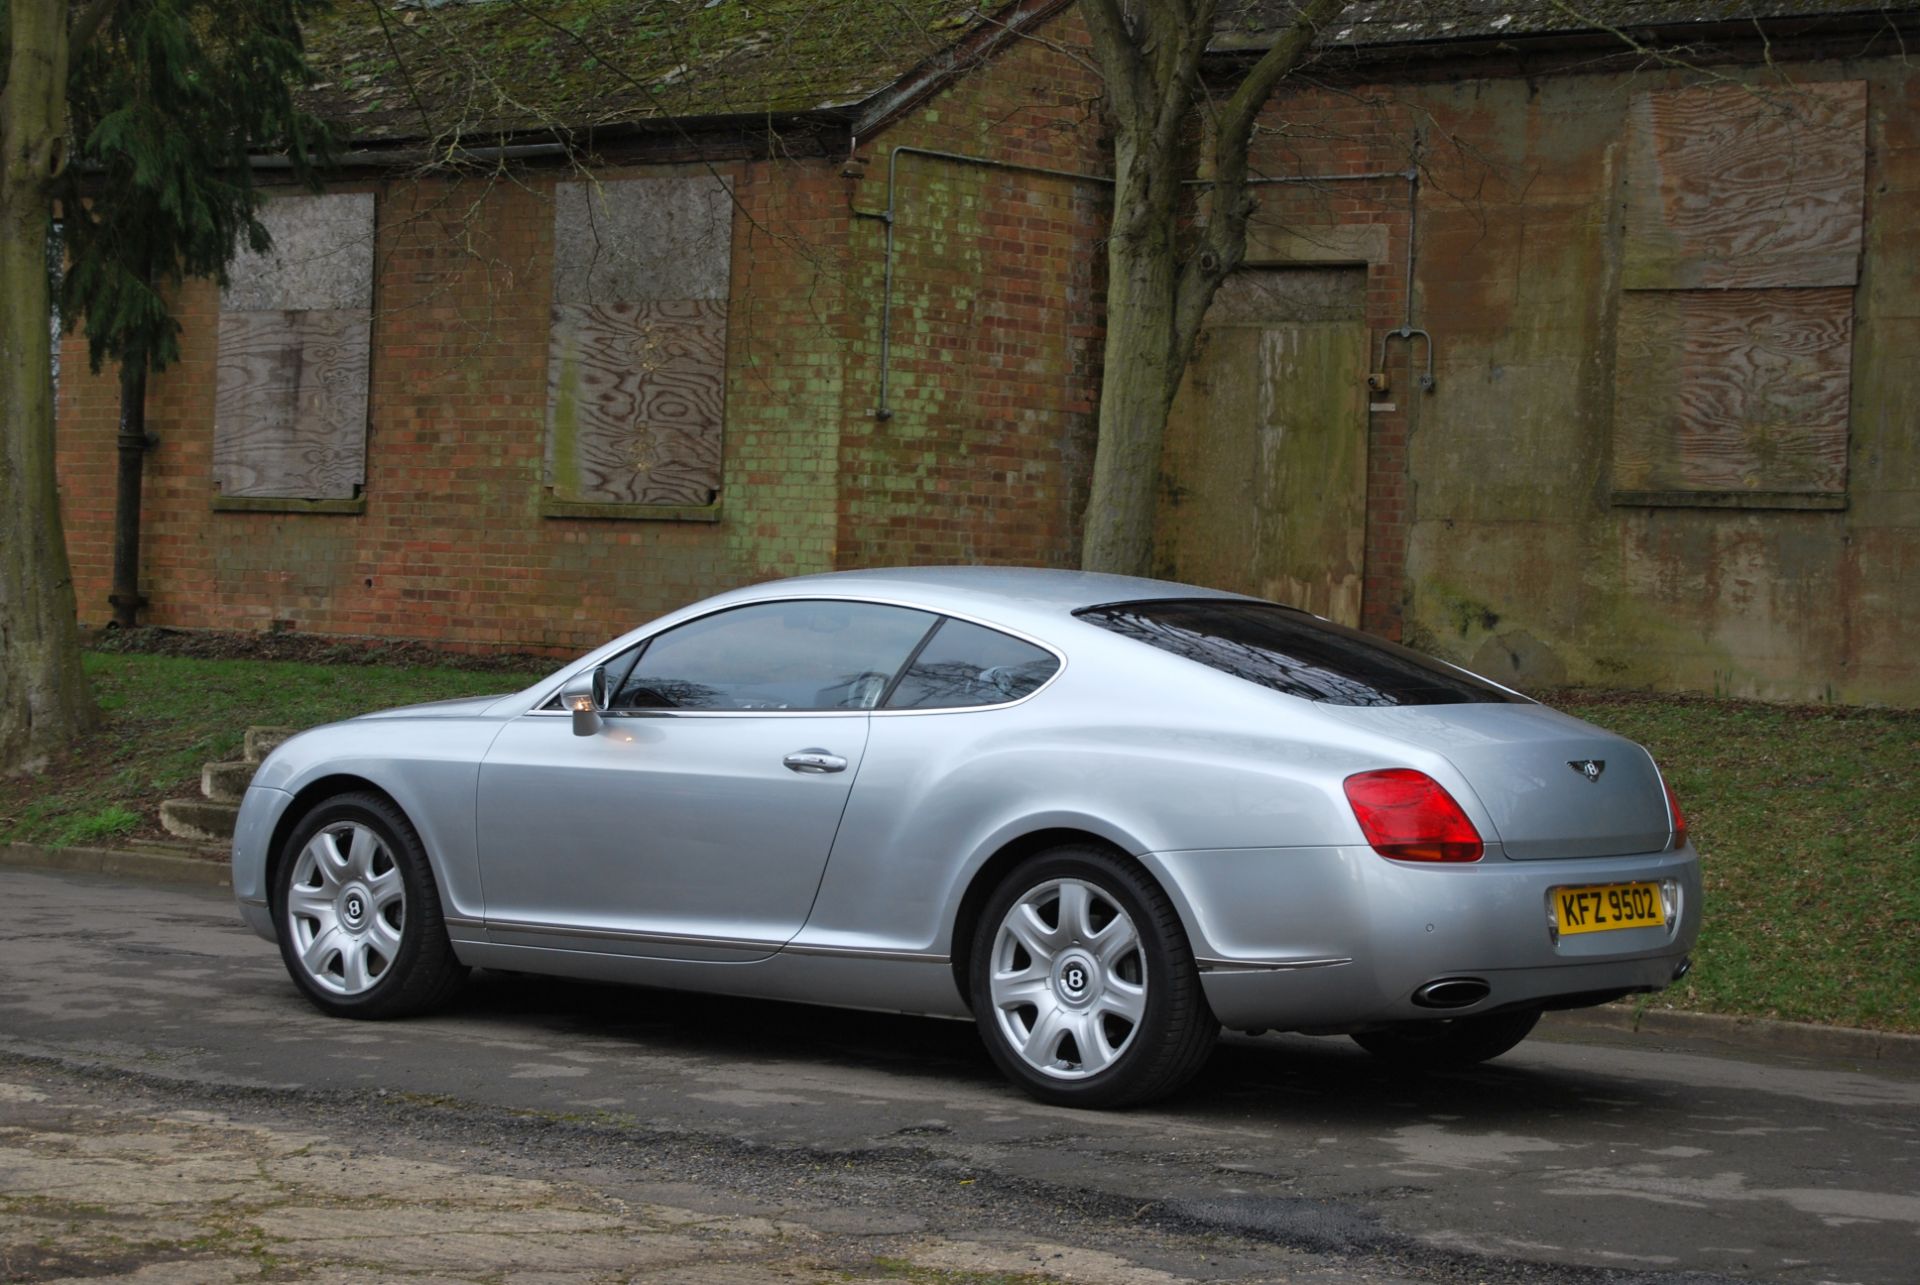 2004 Bentley Continental GT Chassis no. SCBCE63W34CO22664 - Bild 10 aus 11